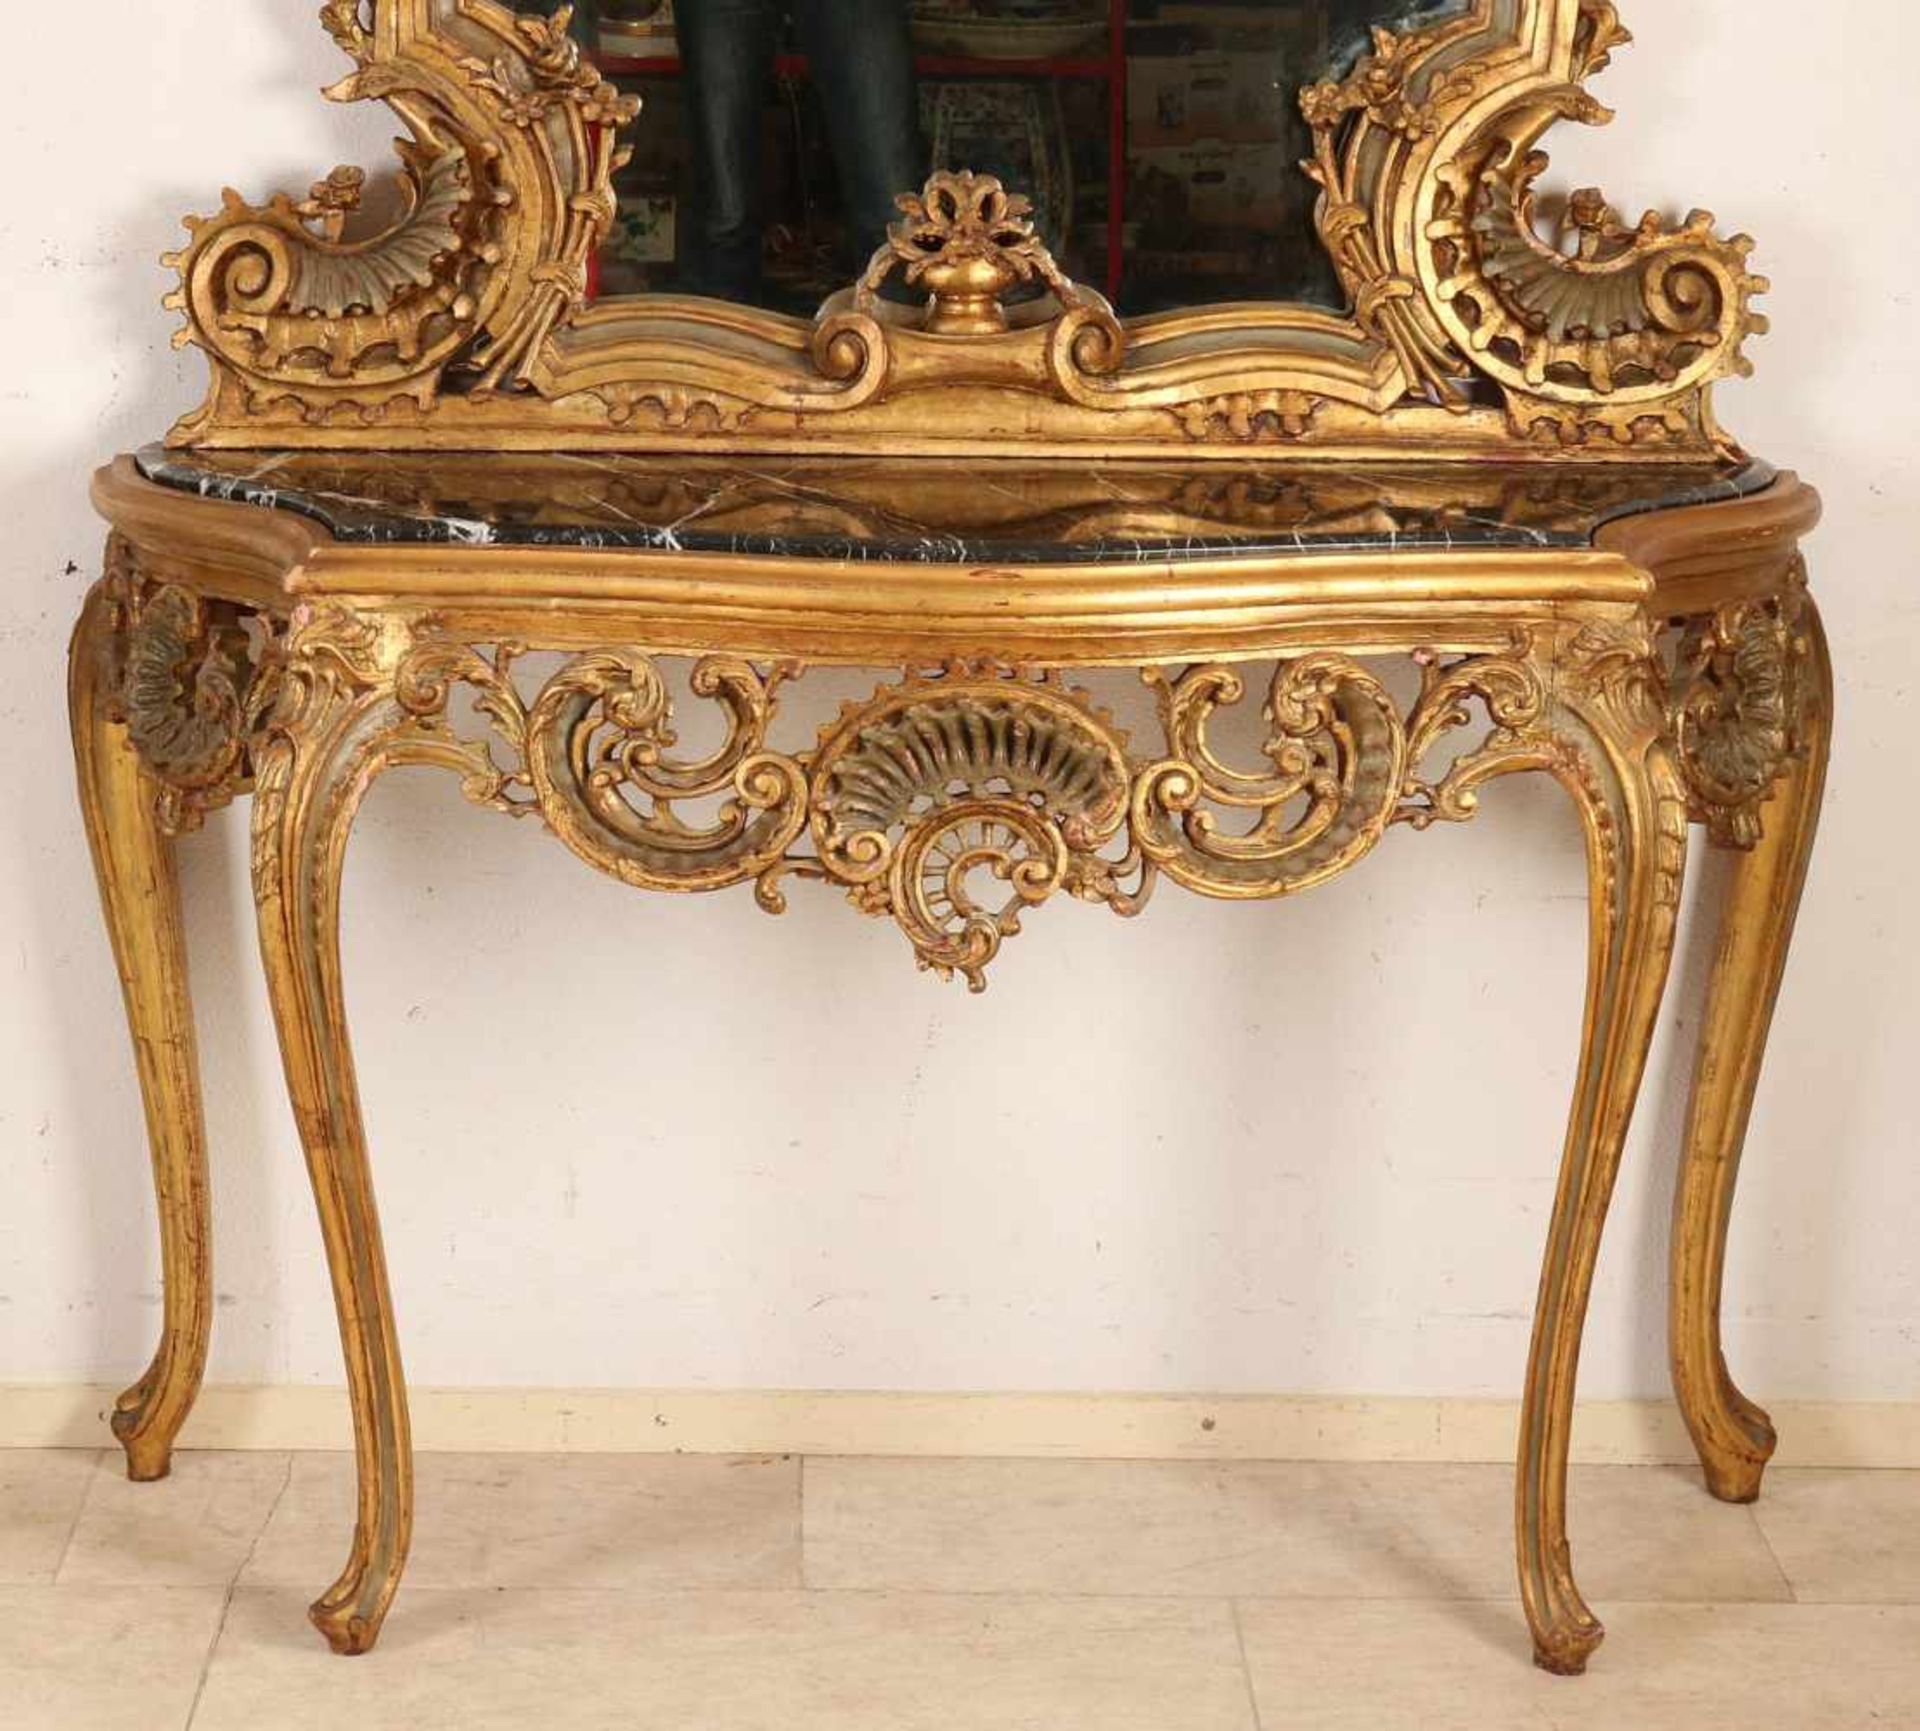 Great Italian gilt wood mirror with console stabbed. Rococo-style. 20th century. Crack in glass. - Bild 2 aus 2